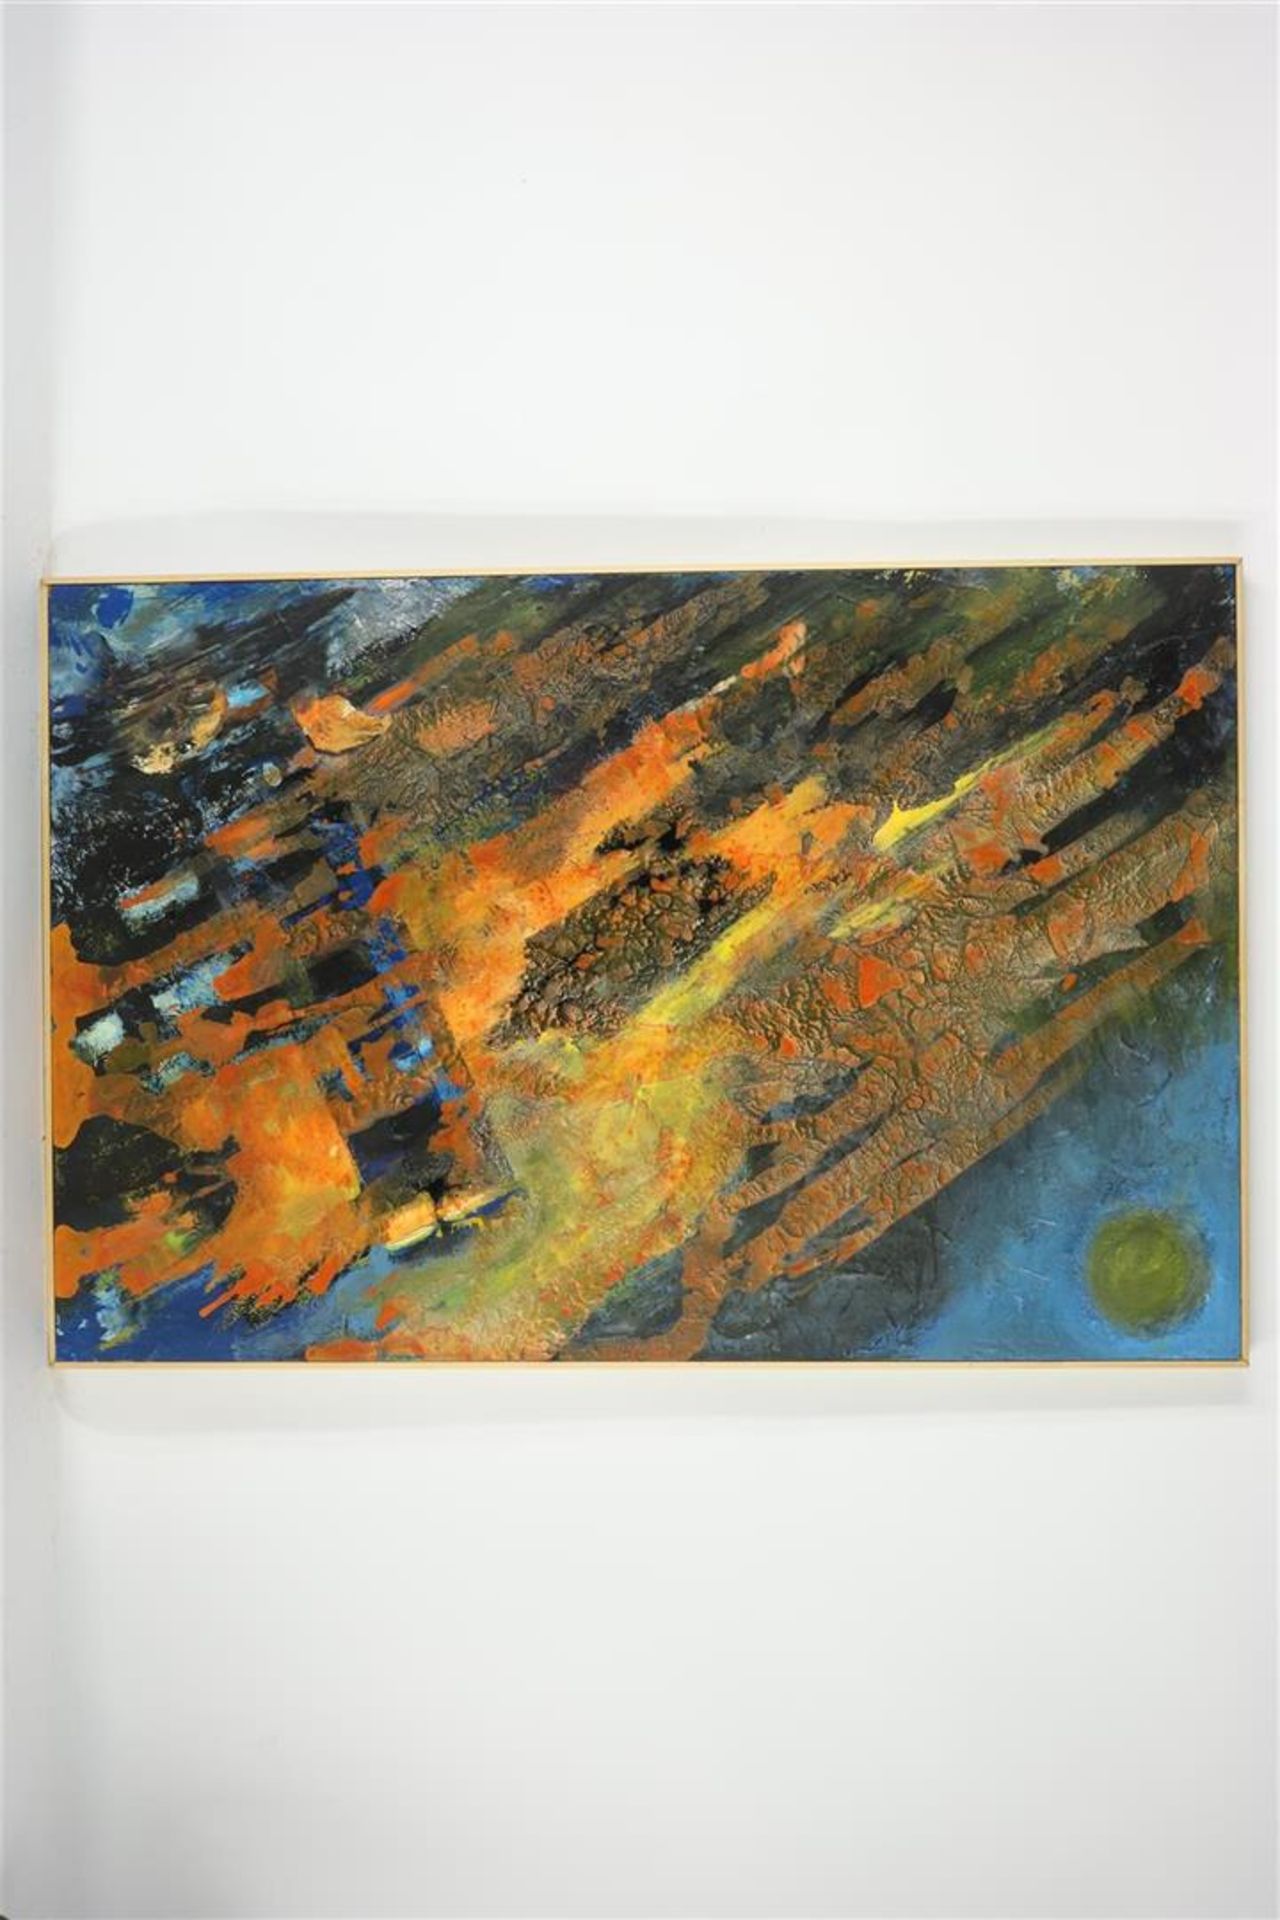 Ninke Kast (1926-2022) 'Shipwreck', signed and dated 2000 on the reverse, board 80 x 120 cm.